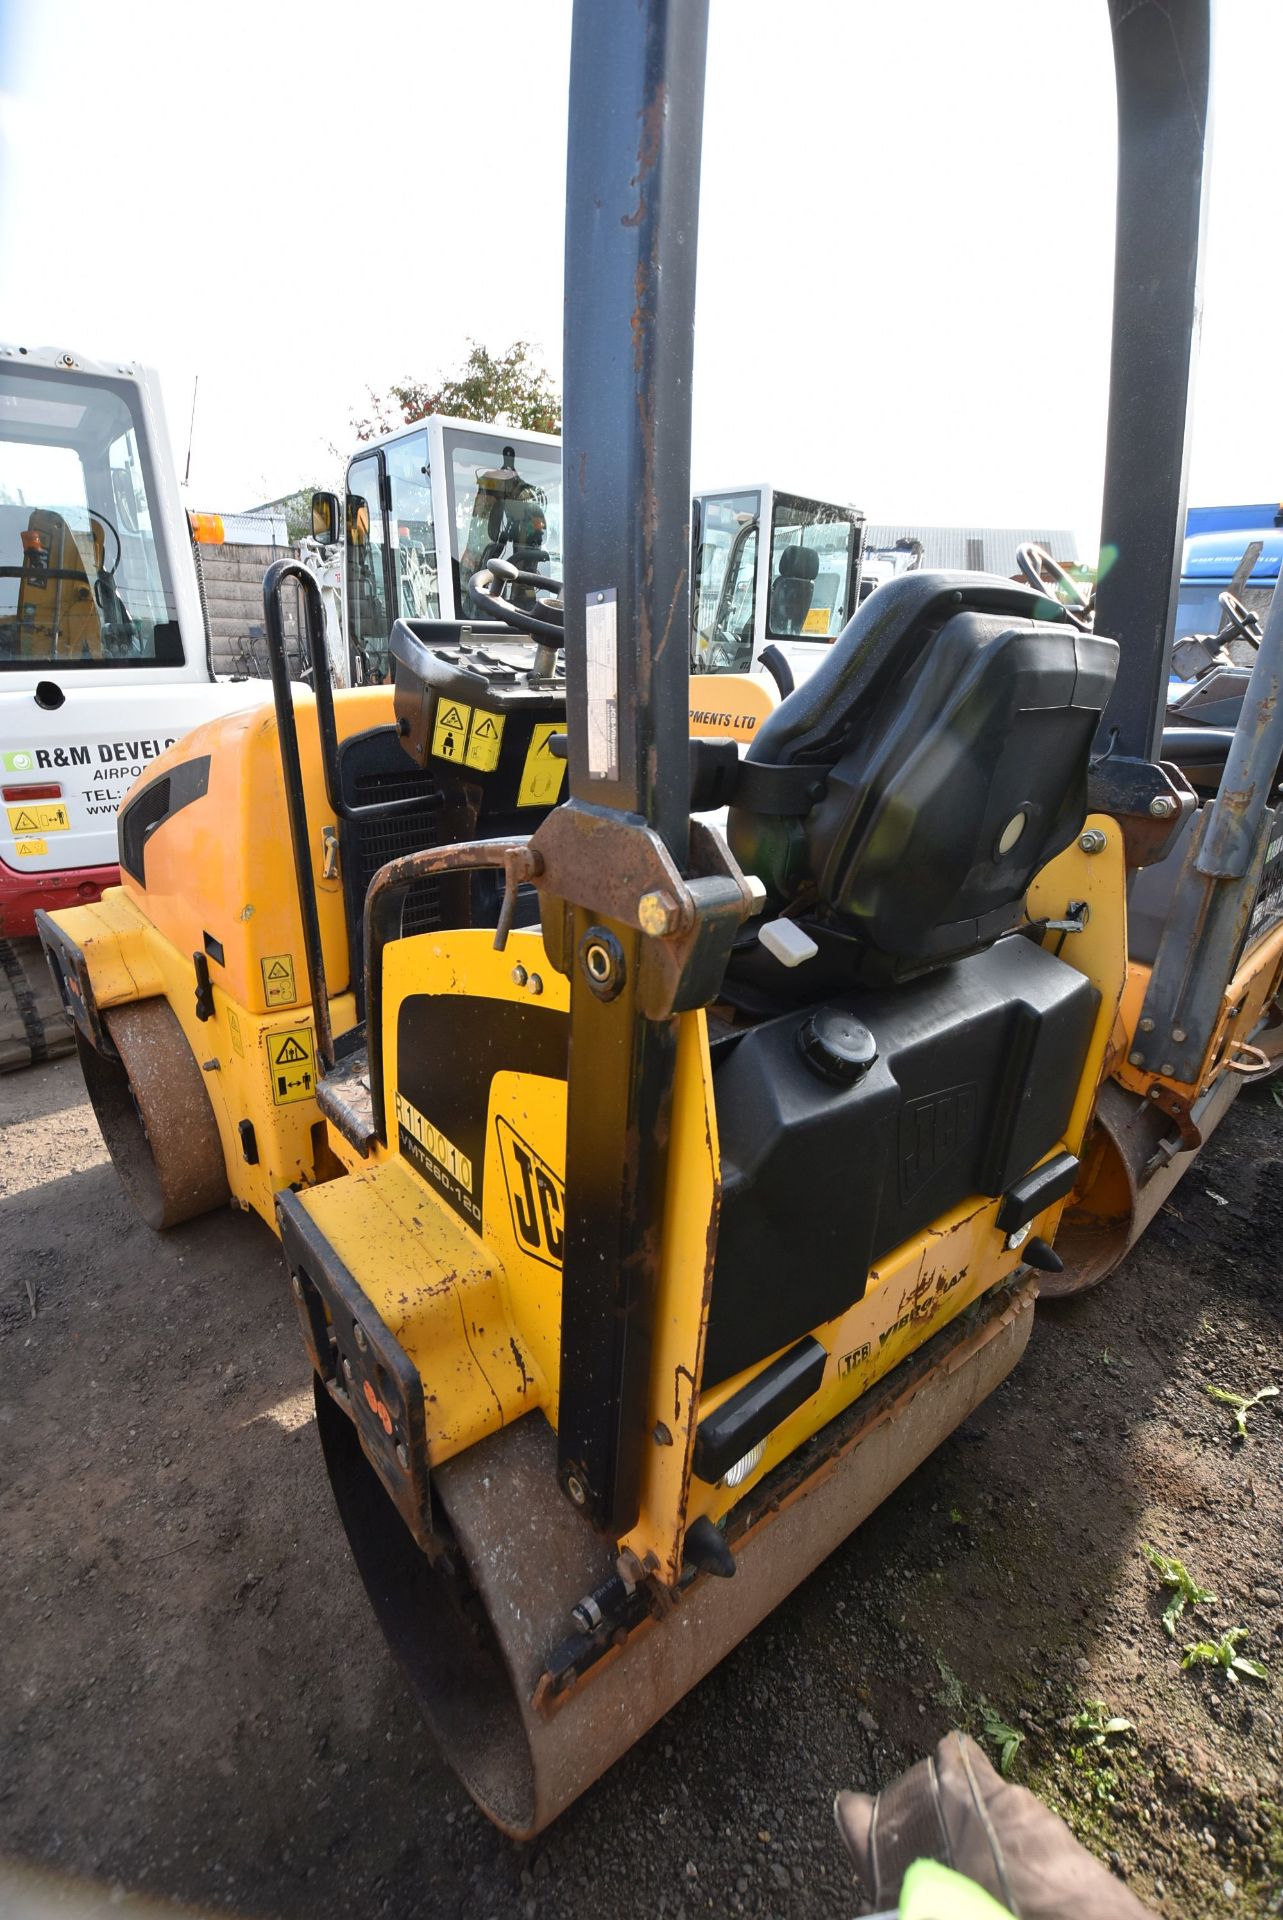 JCB VMT260-120 VIBROMAX VIBRATORY ROLLER, serial no. 1701216, year of manufacture 2008, 2700kg - Image 4 of 5